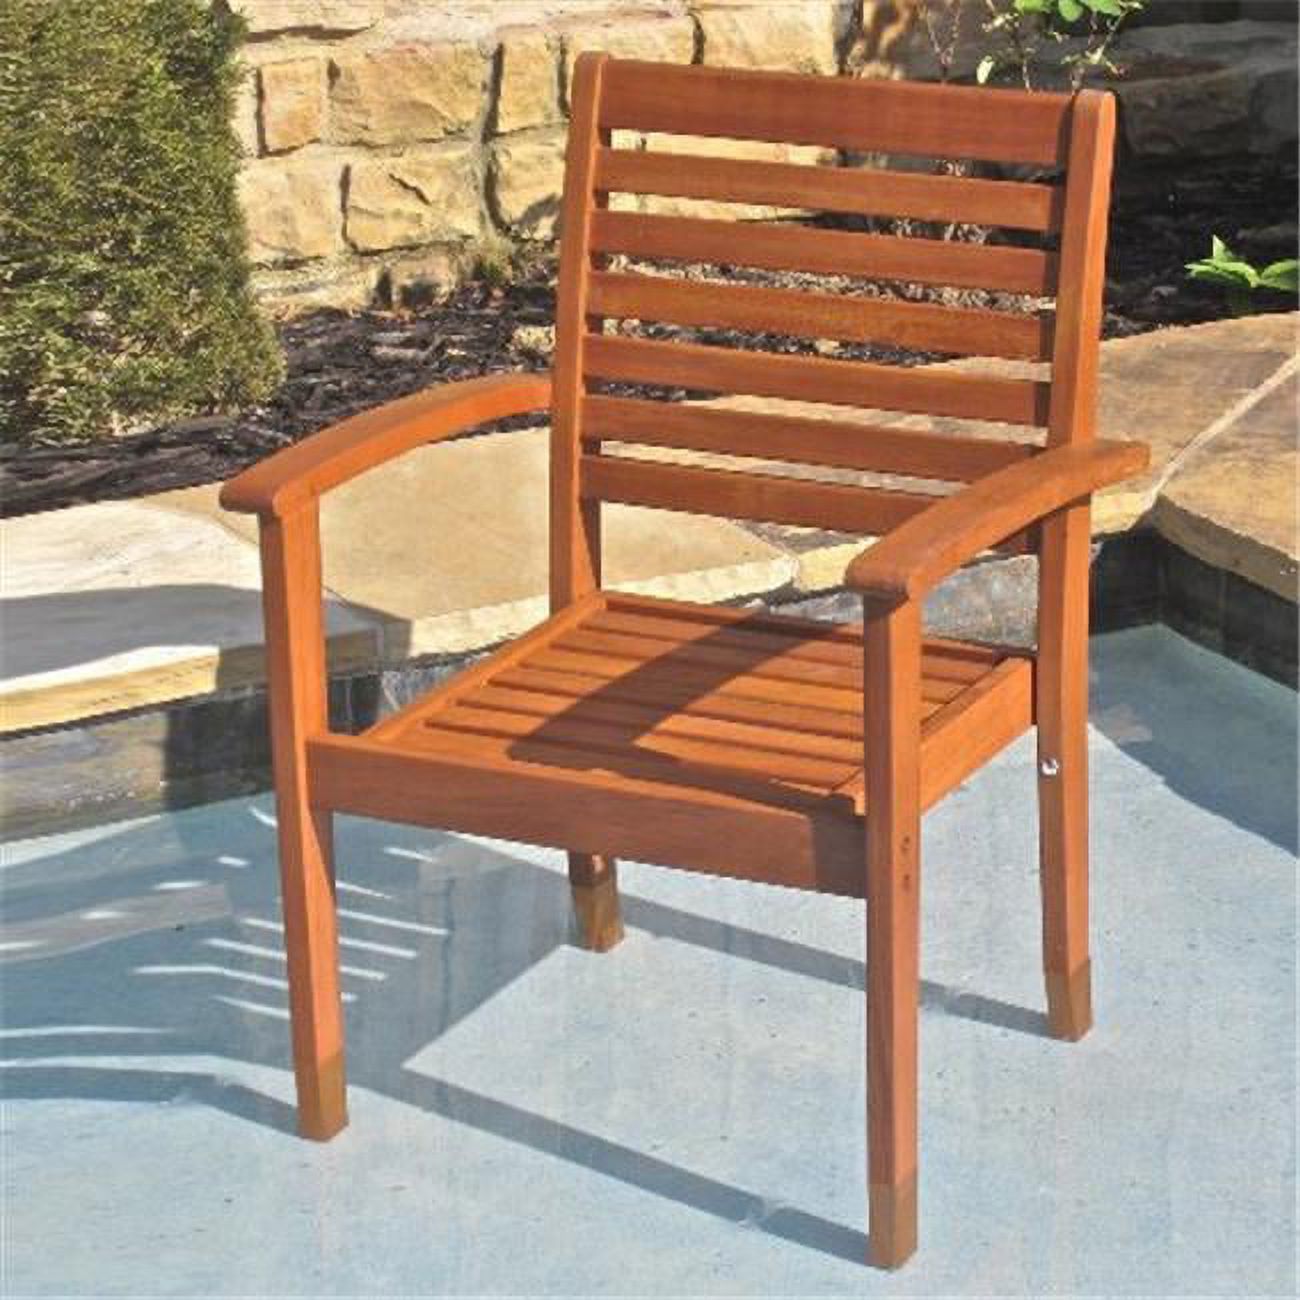 TT-1B-043 and 2CH Royal Tahiti Set of 2 Oslo Outdoor Contemporary Chairs - image 1 of 1